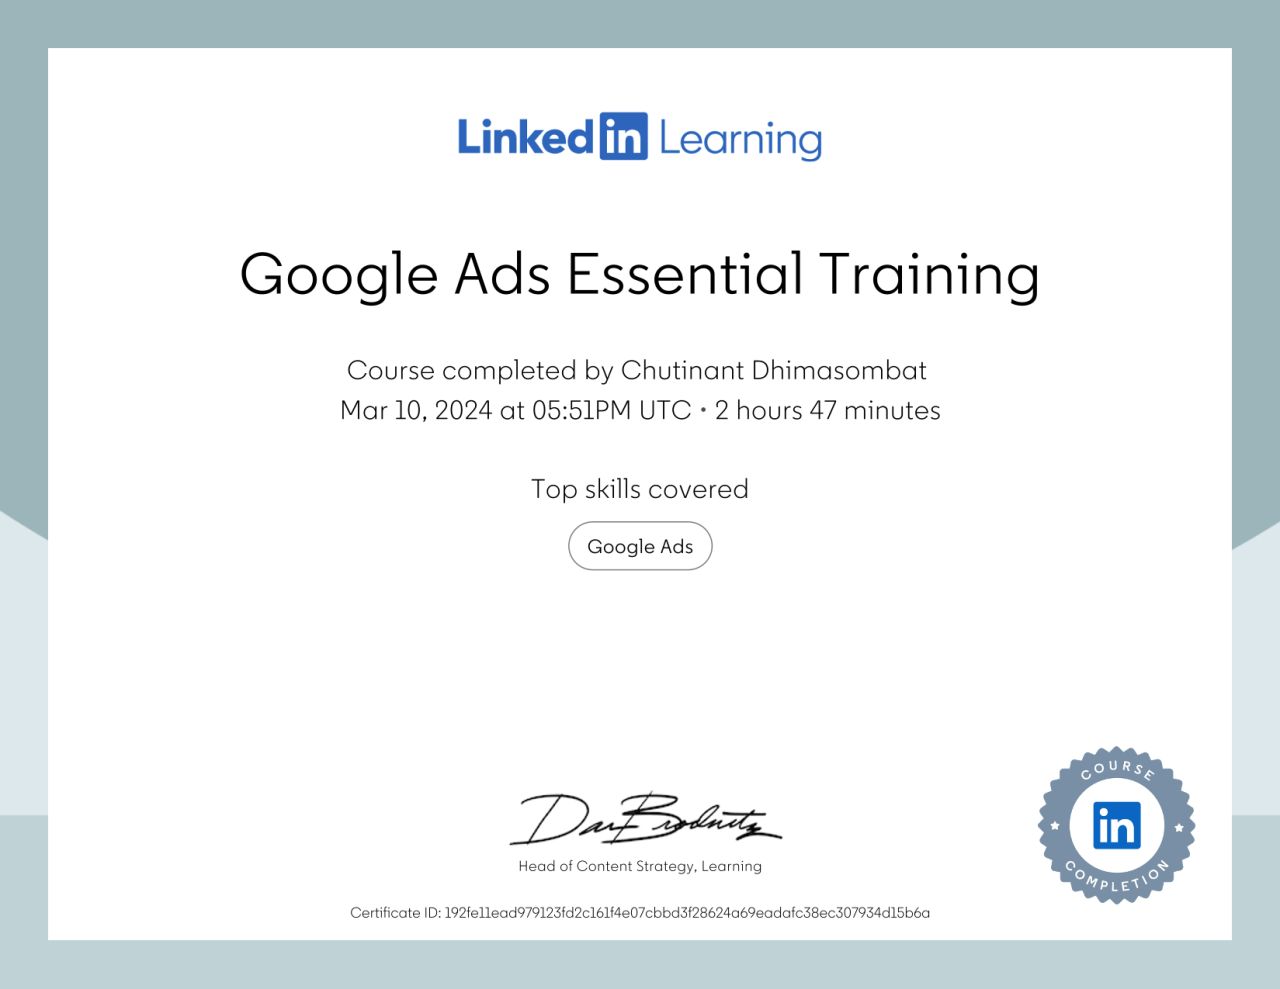 Certificate of completion for Google Ads Essential Training content earned by Chutinant Dhimasombat